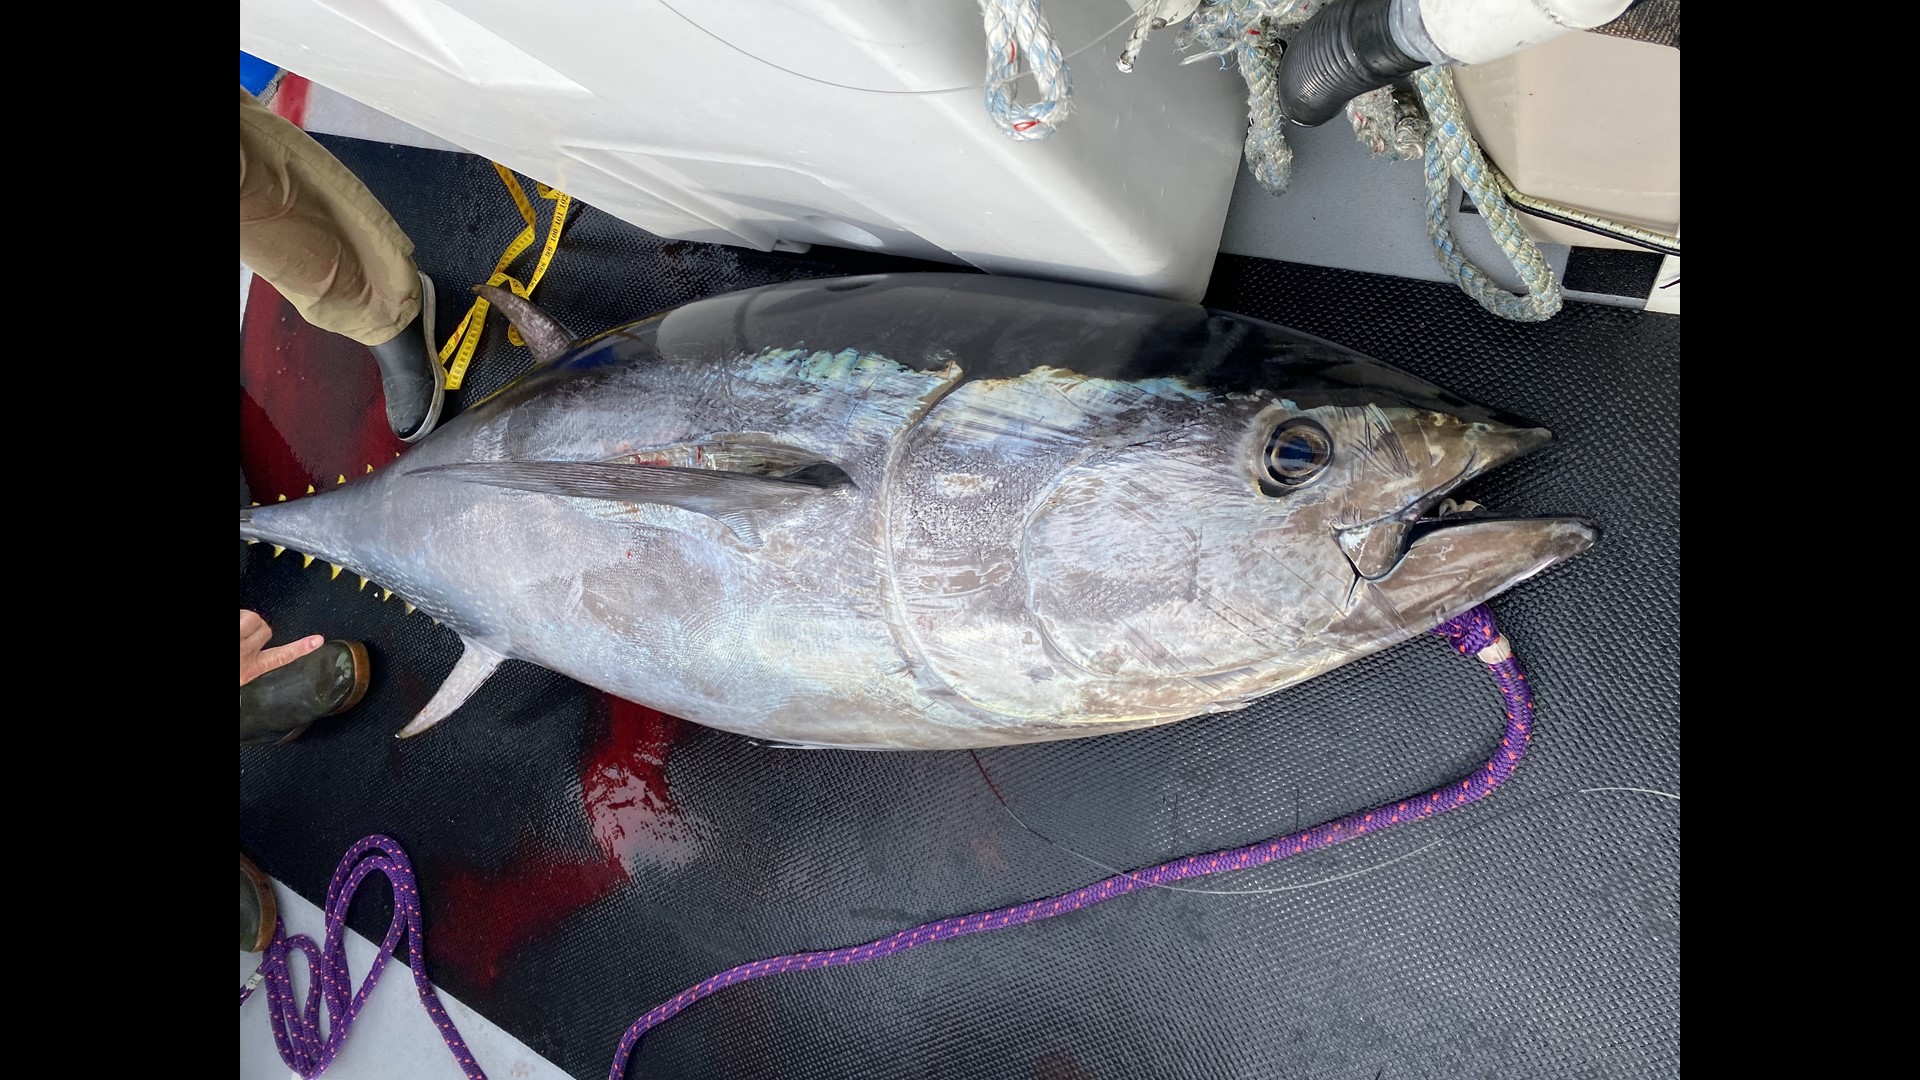 The tracking project will let researchers look into the lives of bluefin tuna on an unprecedented scale, unlocking secrets to how they survive in our changing world.